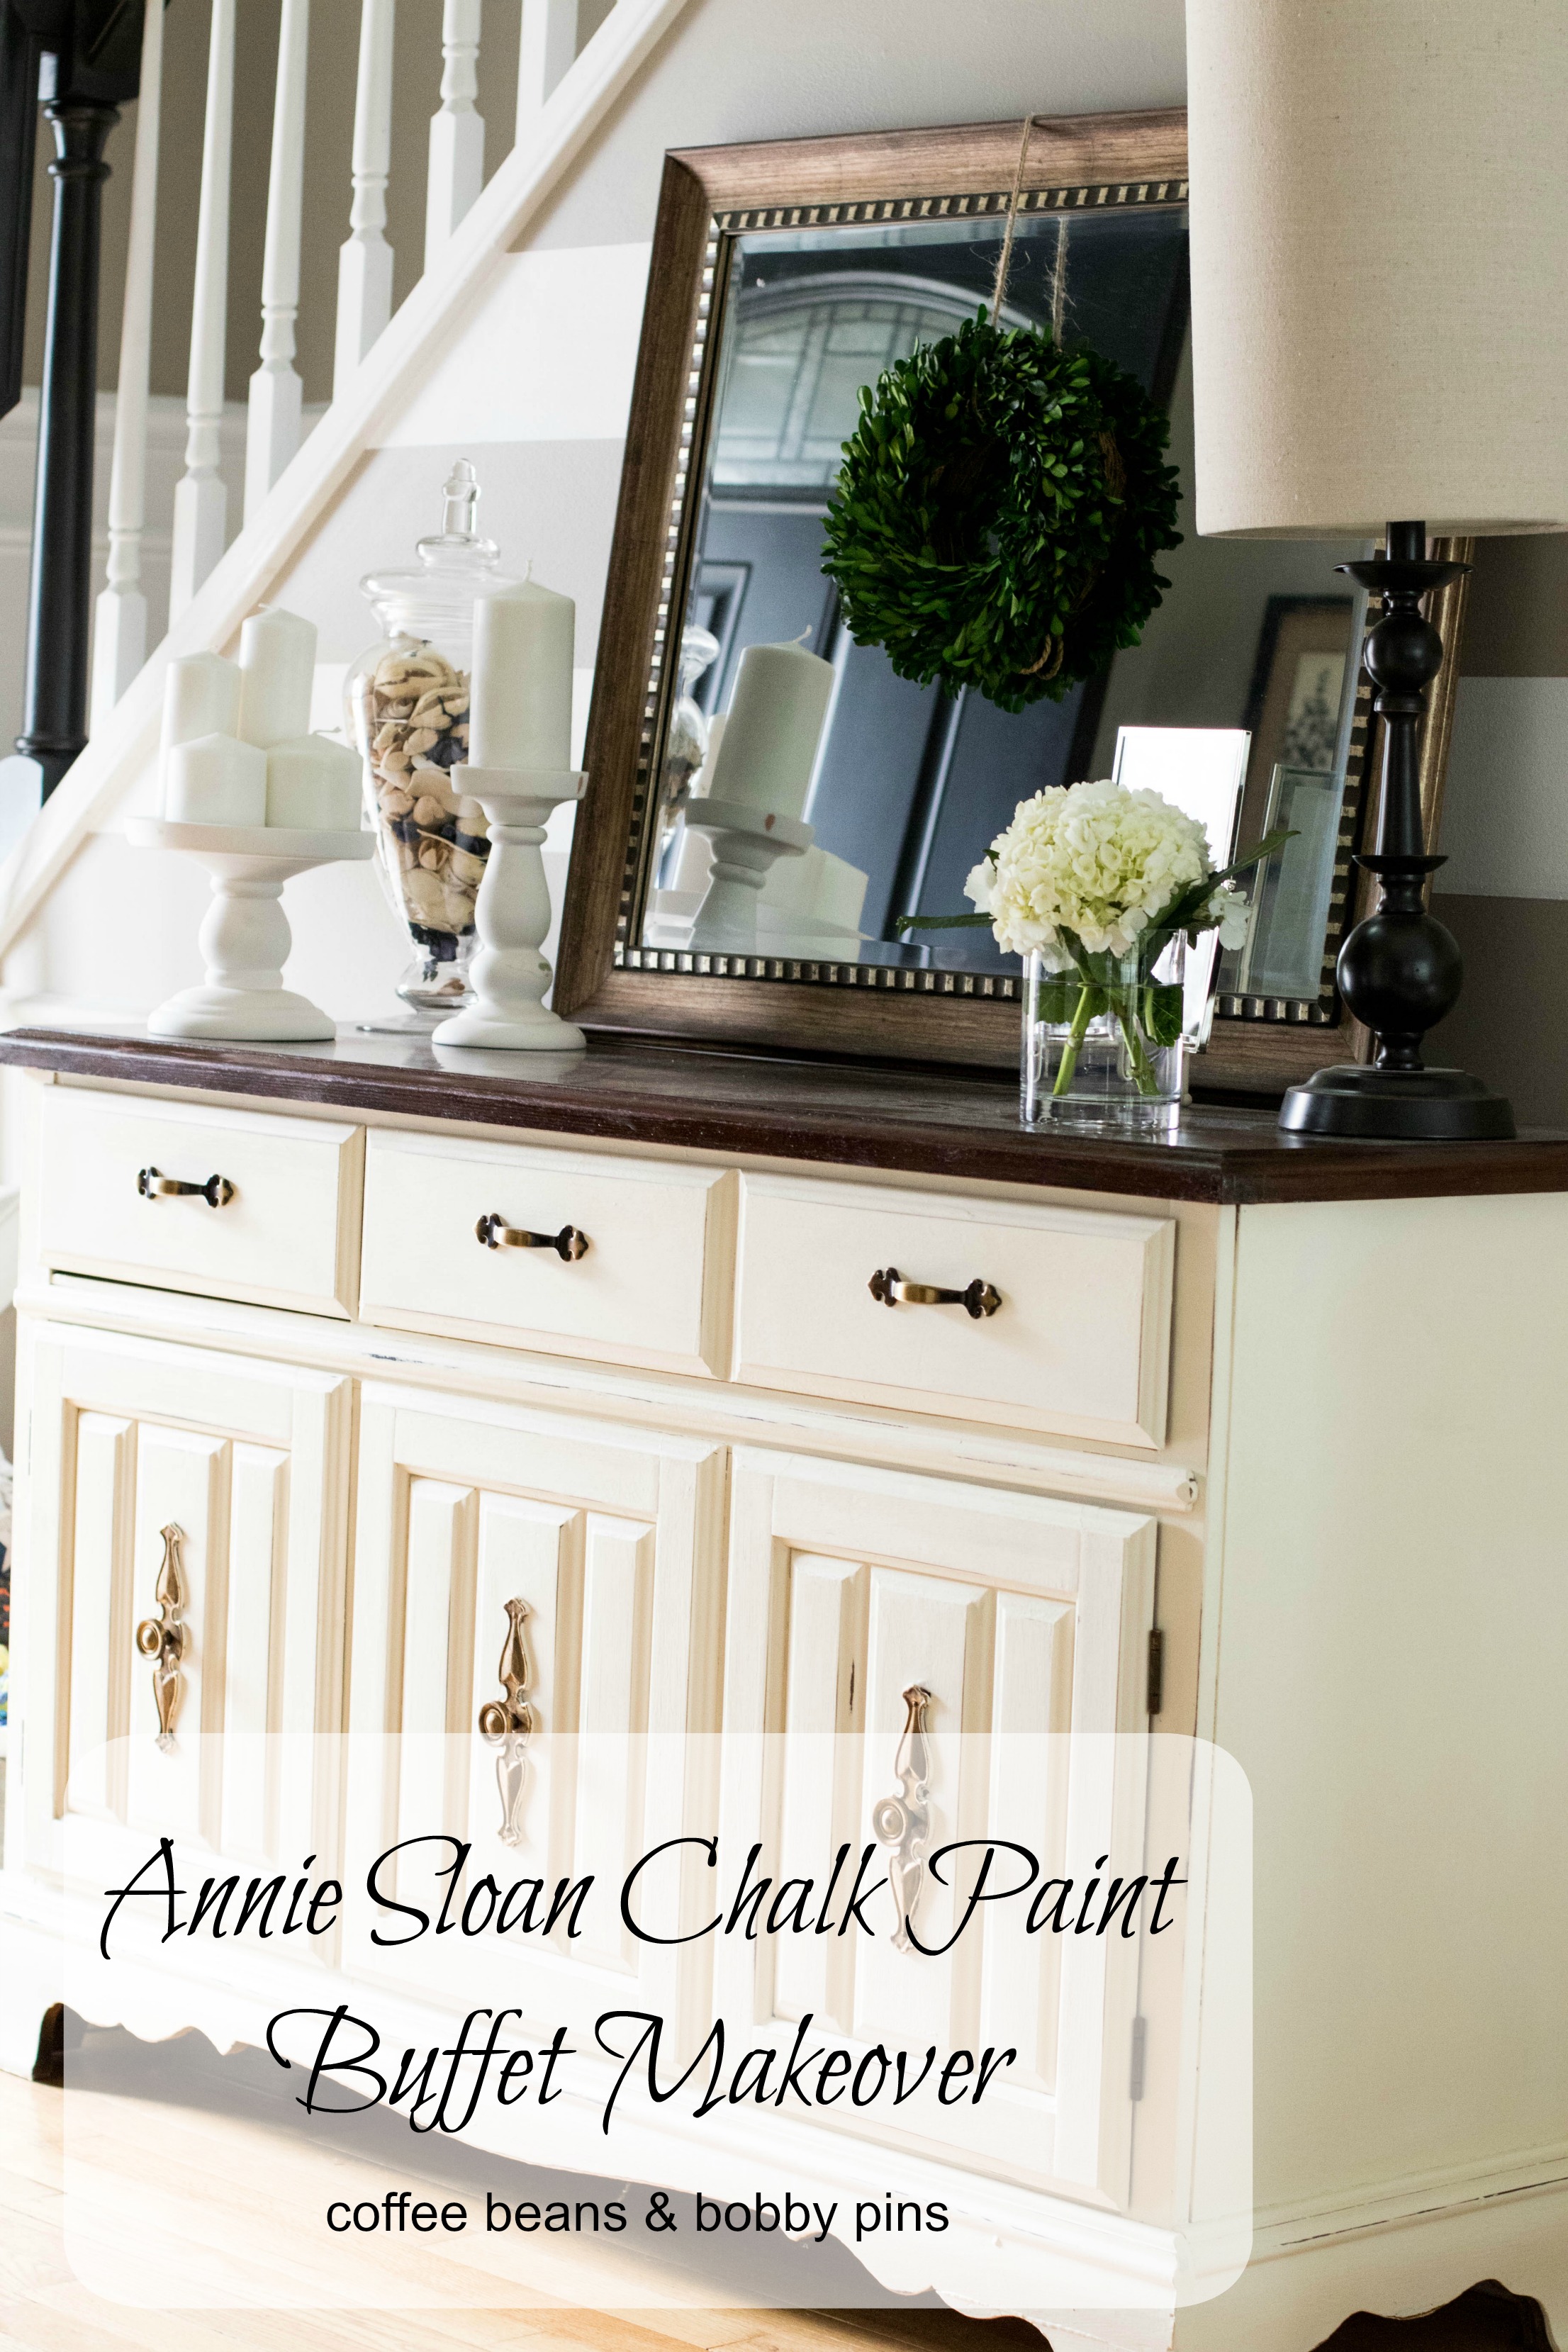 Annie Sloan Chalk Paint: Buffet Makeover by lifestyle blogger Amy of Coffee Beans and Bobby Pins